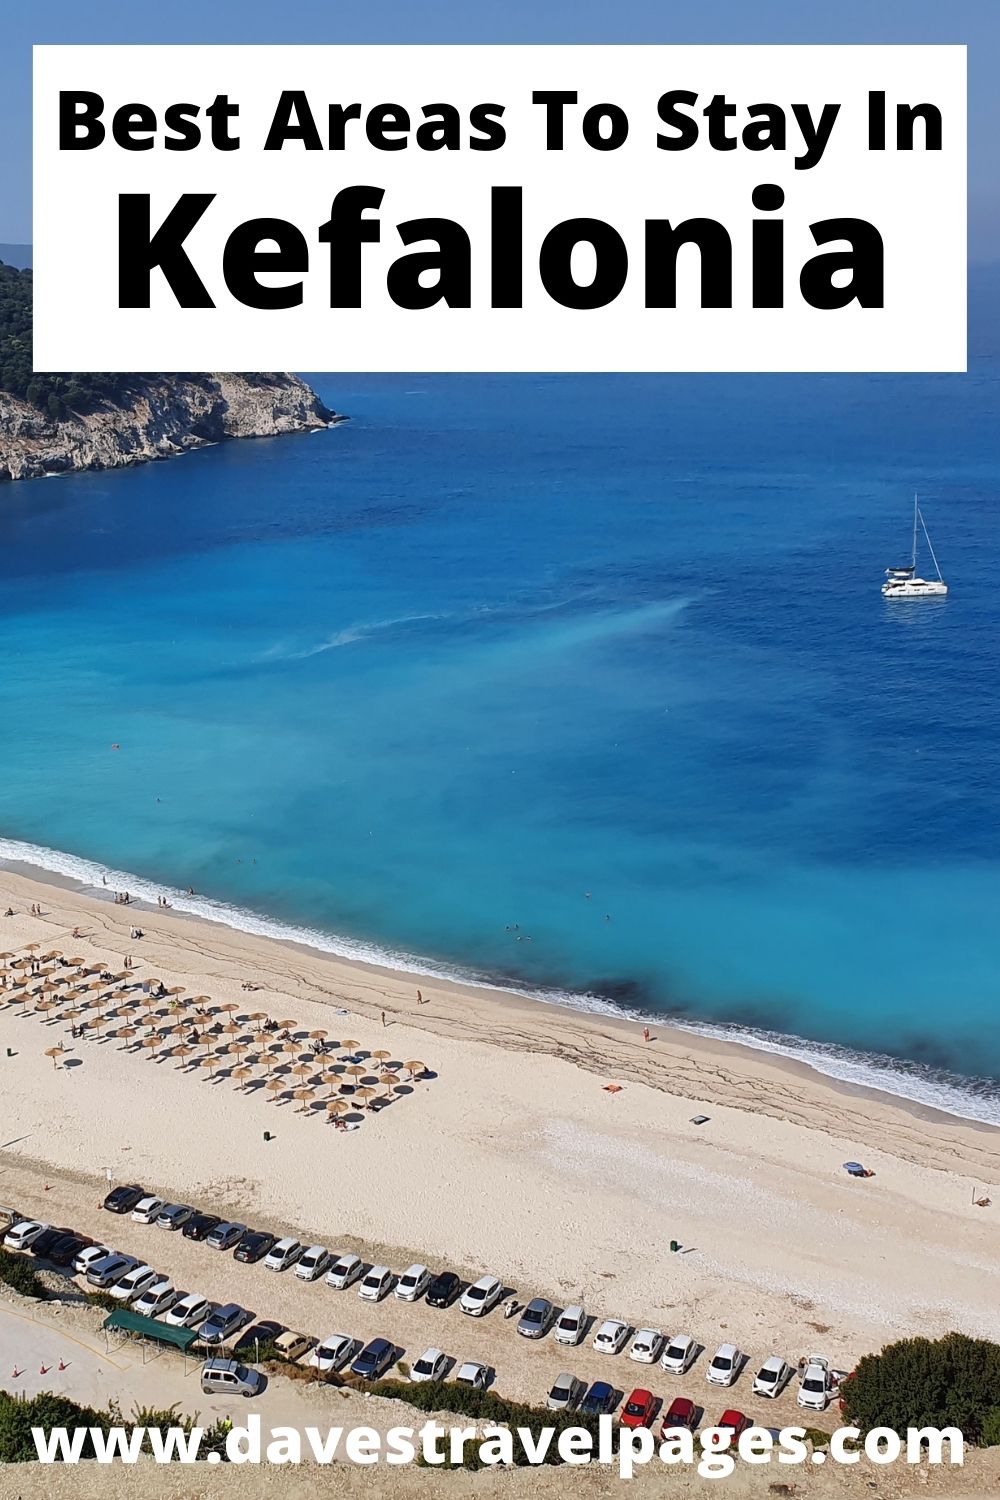 How to choose the best place to stay in Kefalonia